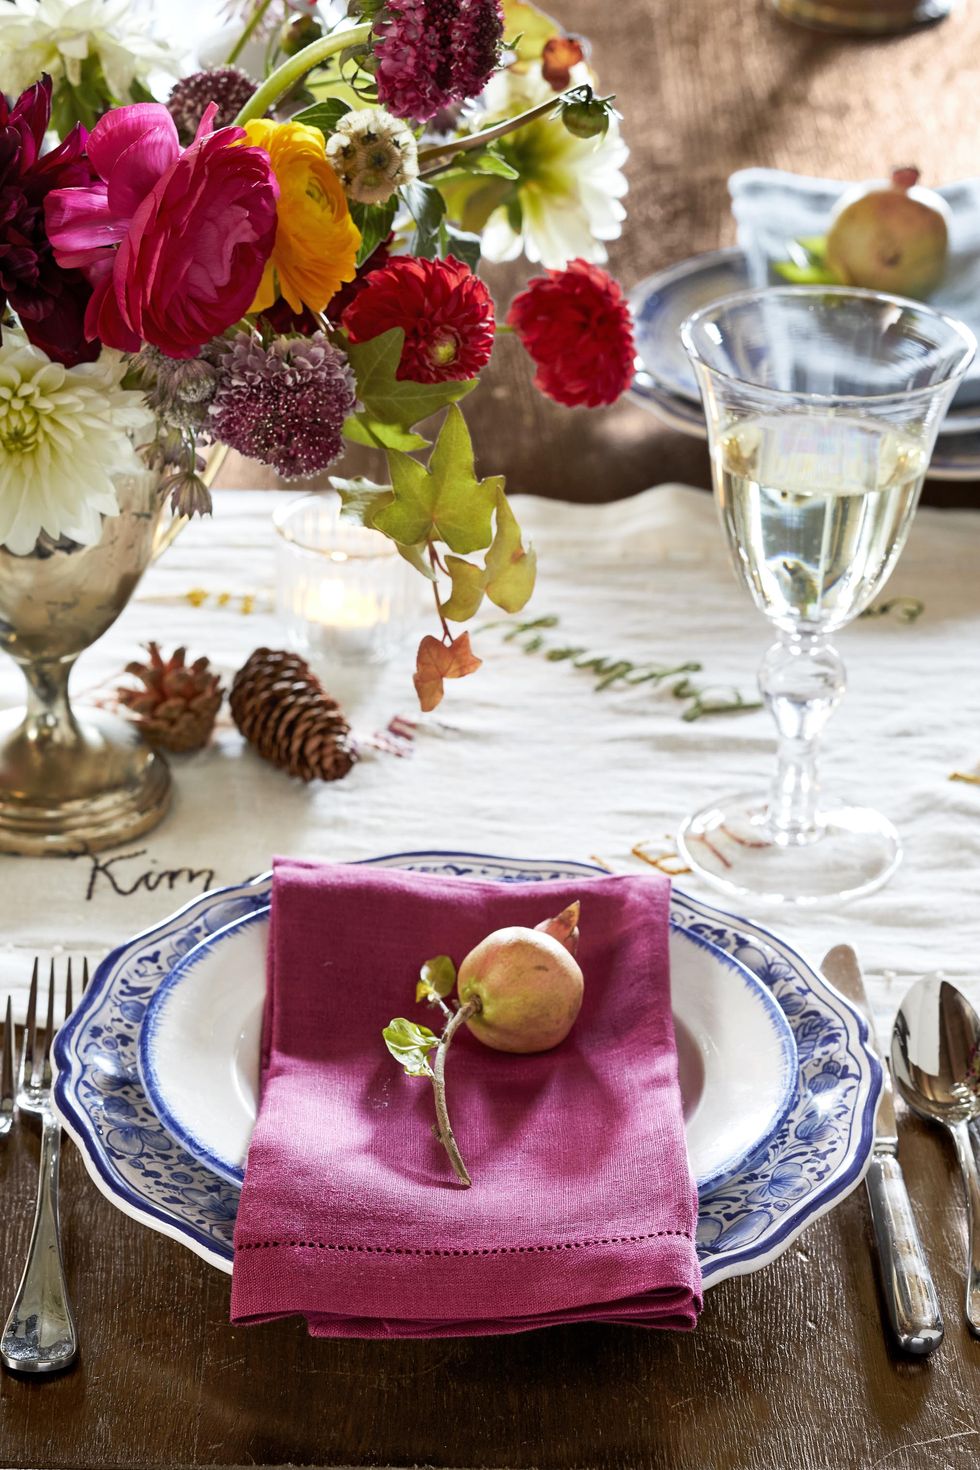 3 Simple Thanksgiving Table Setting Tips That Will Wow Your Guests